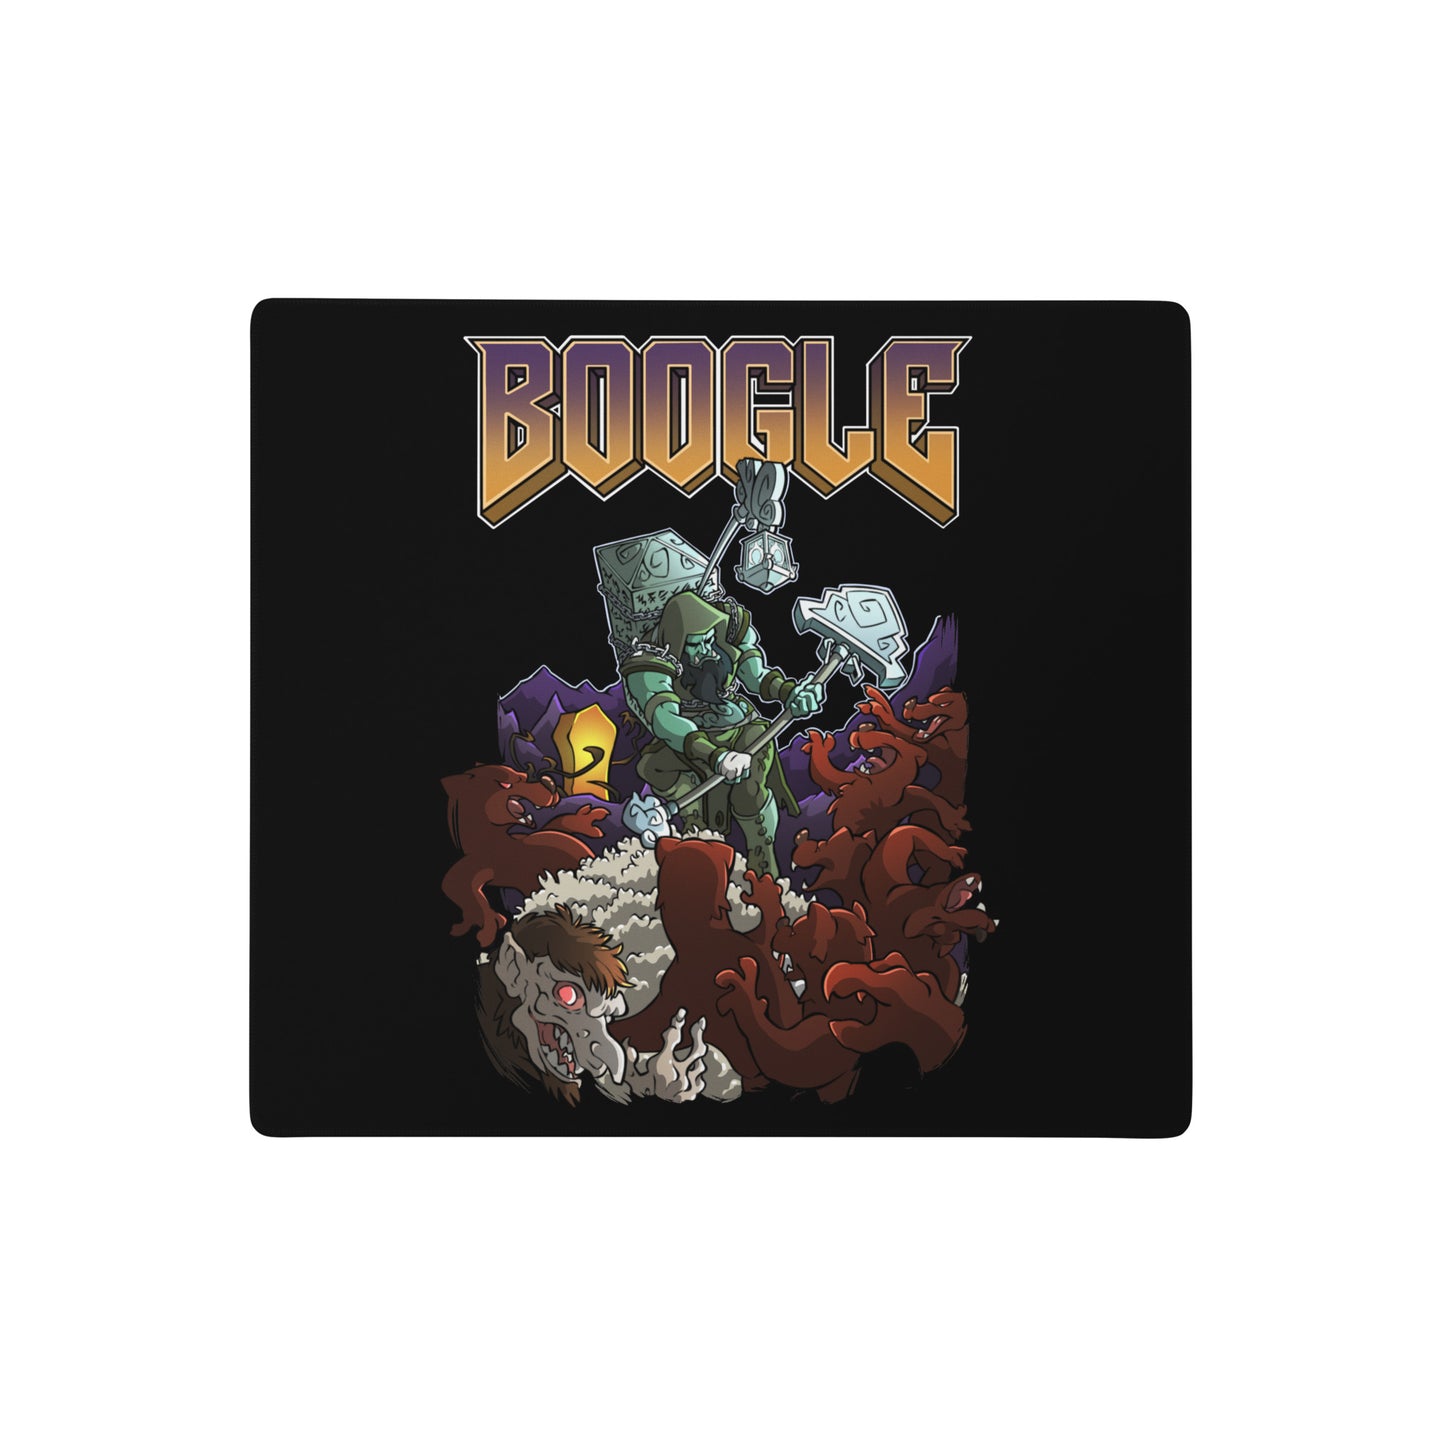 BOOGLE - Gaming Mouse Pad